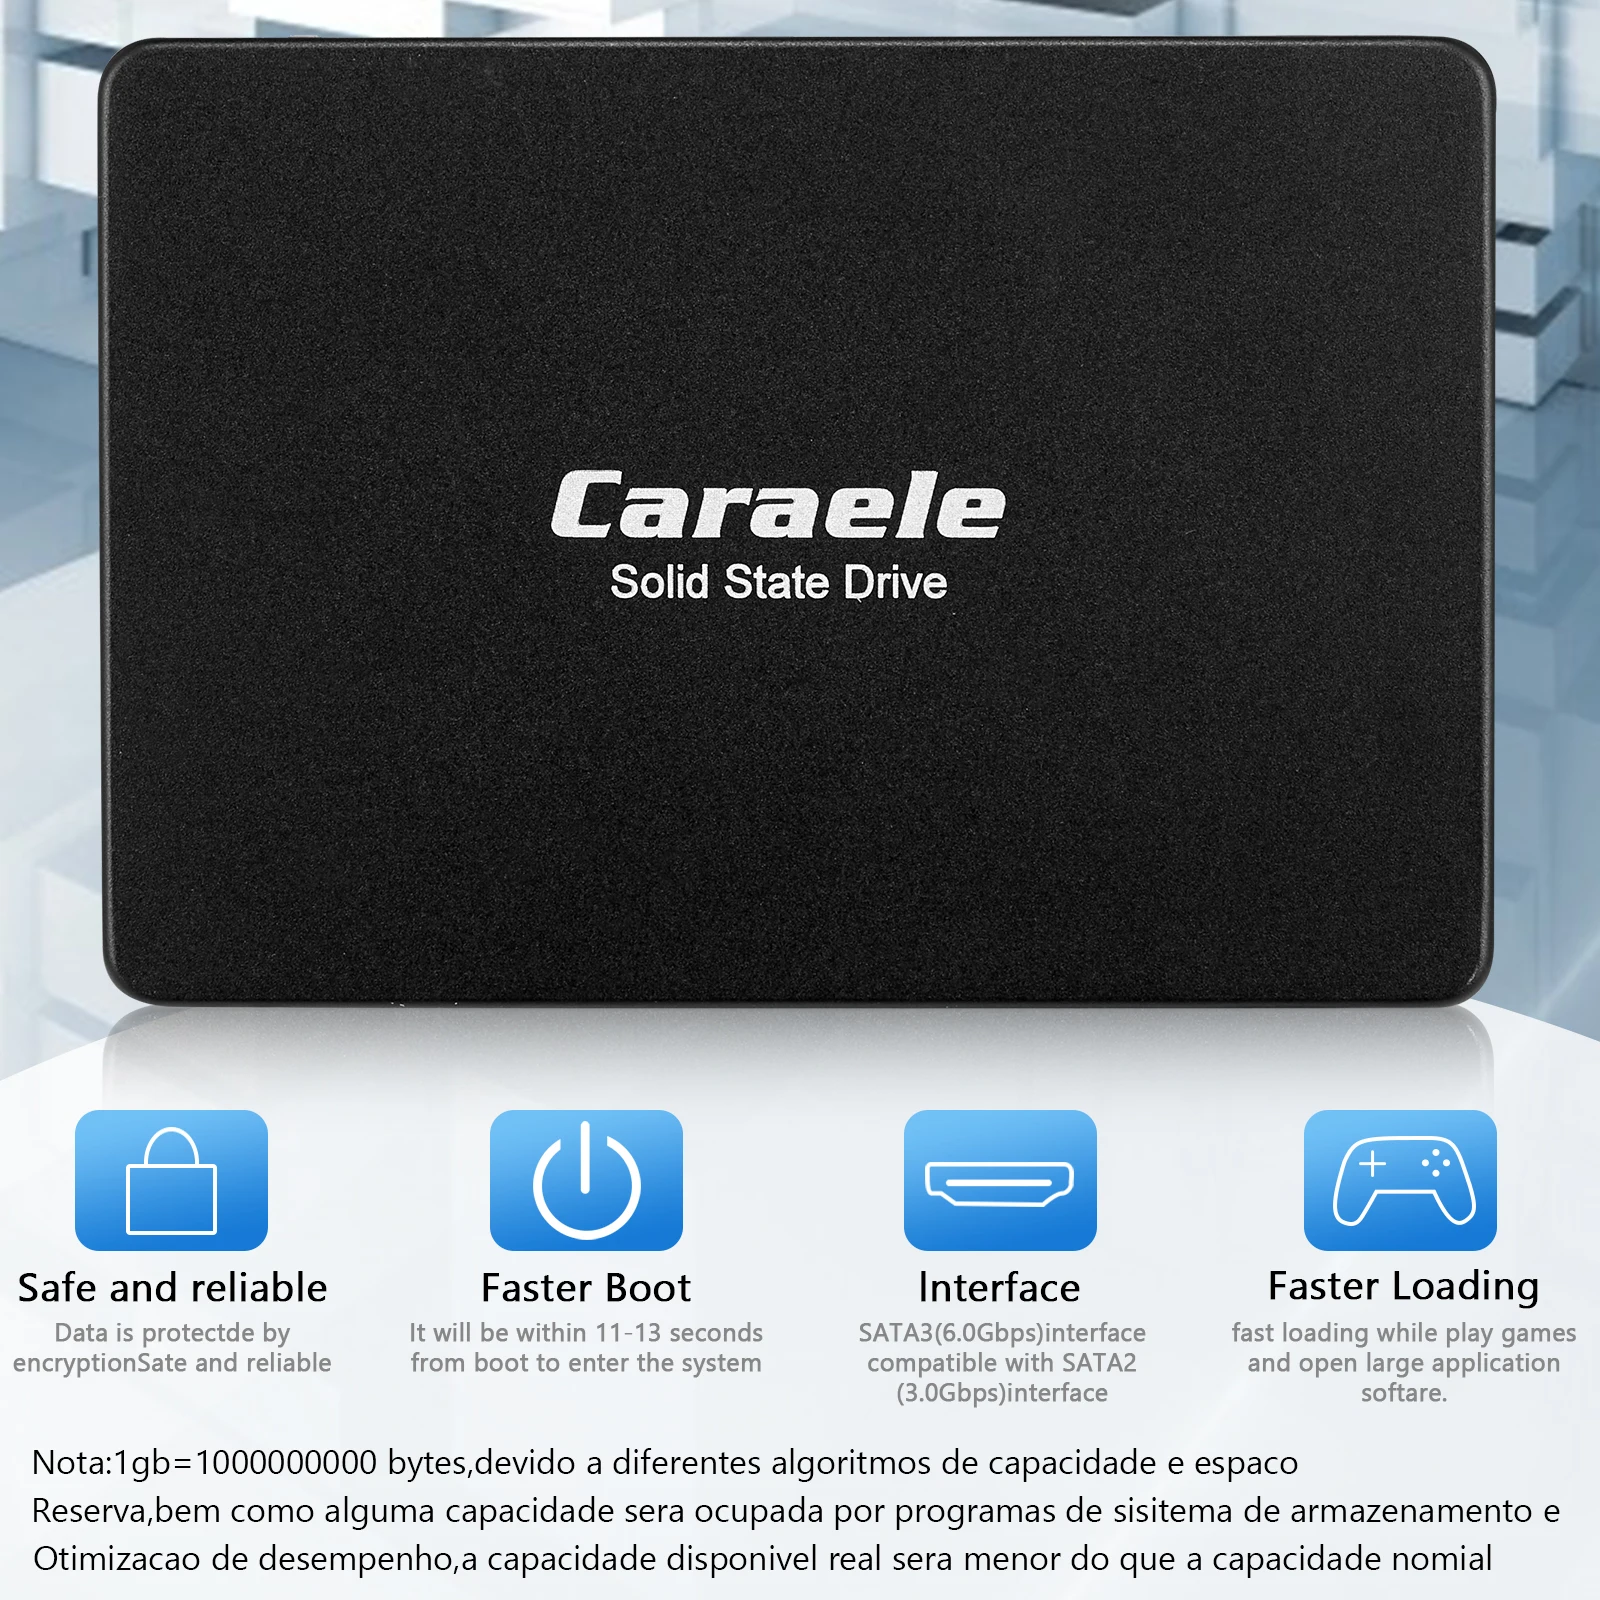 Caraele K500 Internal Solid State Drives Storage Devices SSD 500GB 1TB 2.5 INCH SATA SSD Drive for Computer,Desktop, PC, Laptops enlarge